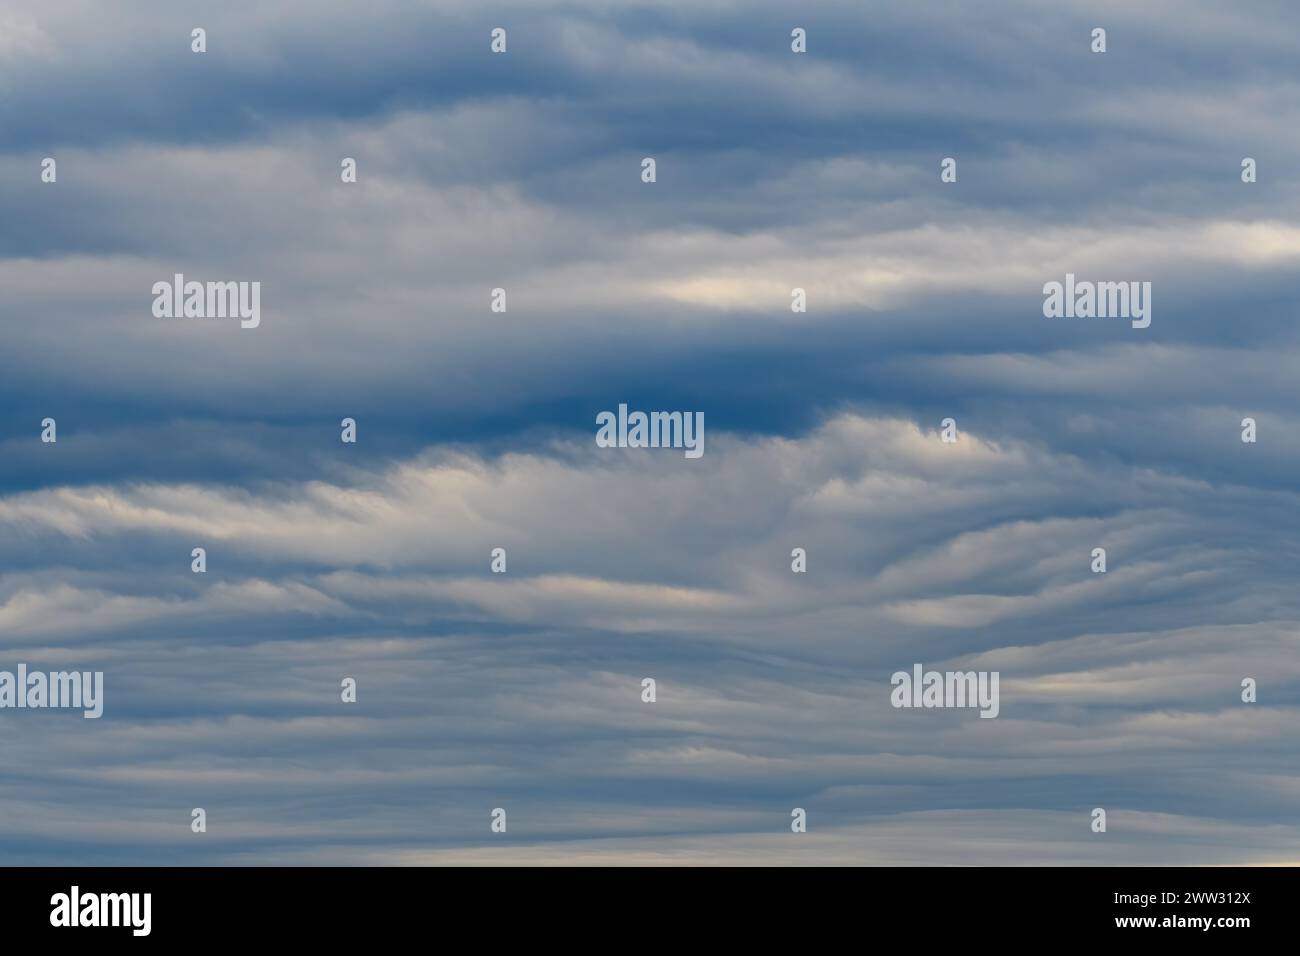 Sky only with clouds, design element Stock Photo